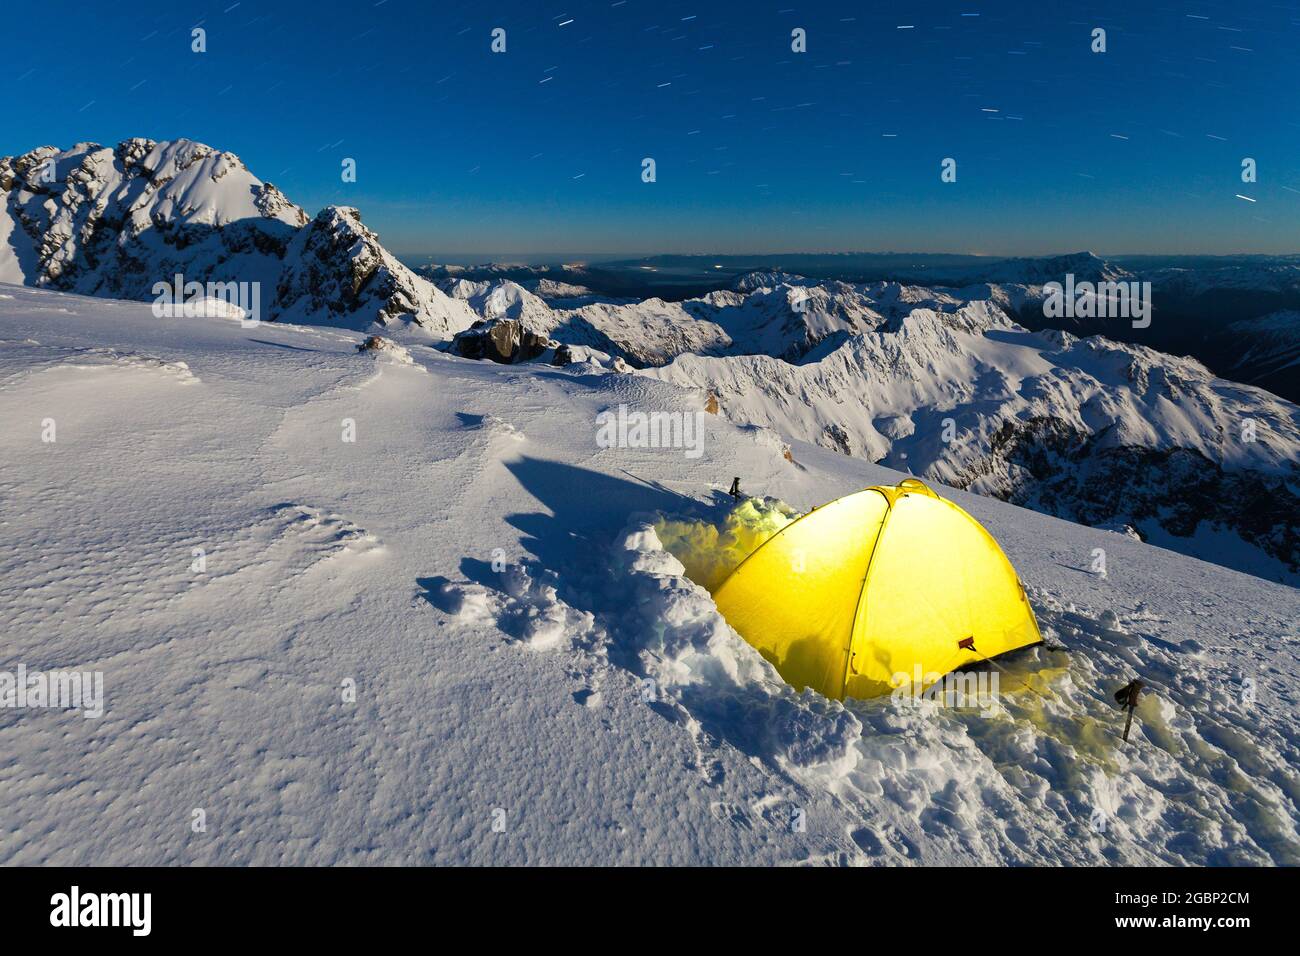 Winter camp on the Low Peak of Mount Rolleston, High Peak in the background, New Zealand Stock Photo